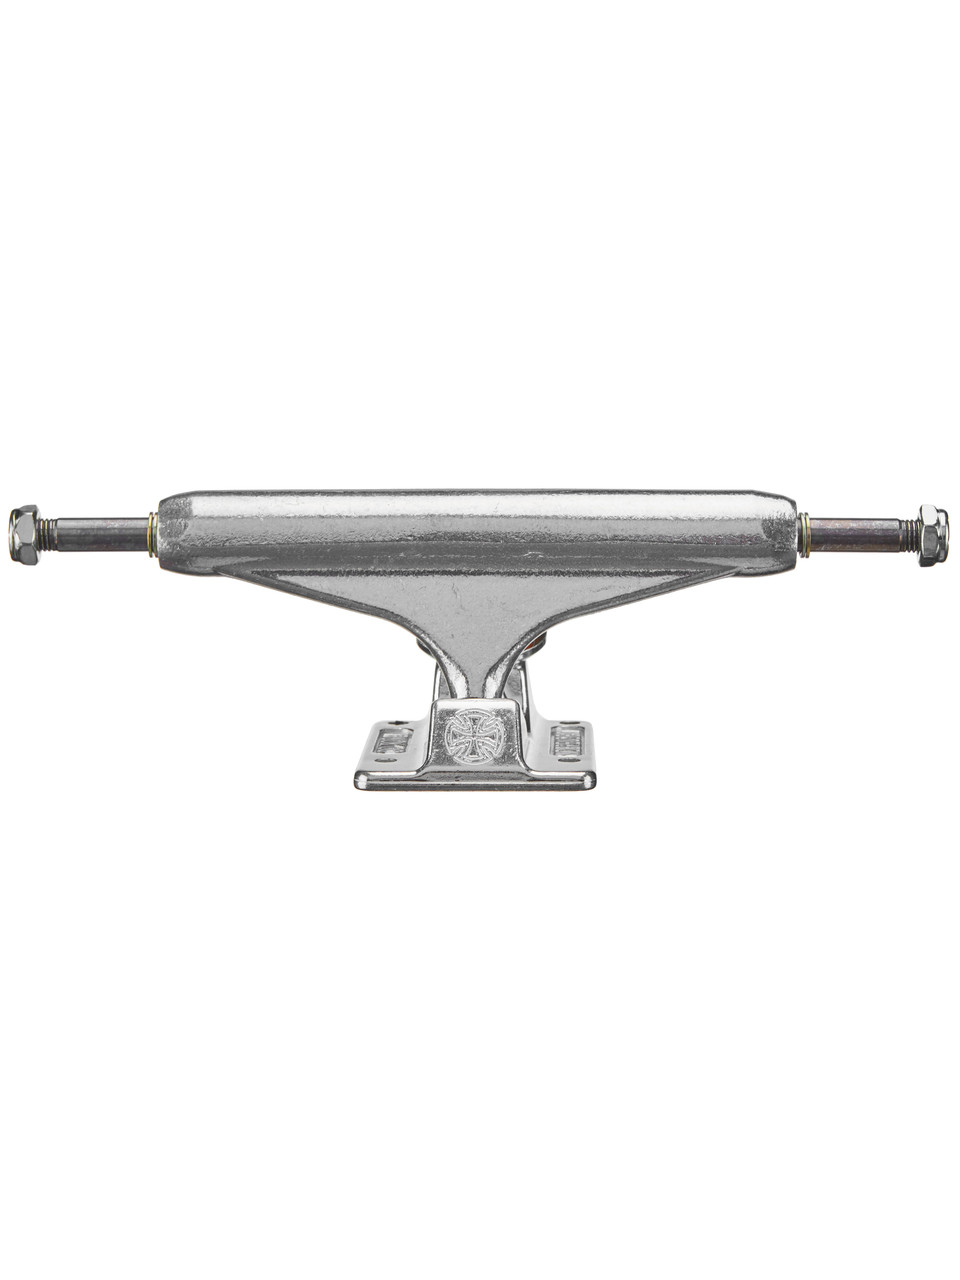 Indepenedent Forged Hollow Stage11 Trucks Silver 159mm Set